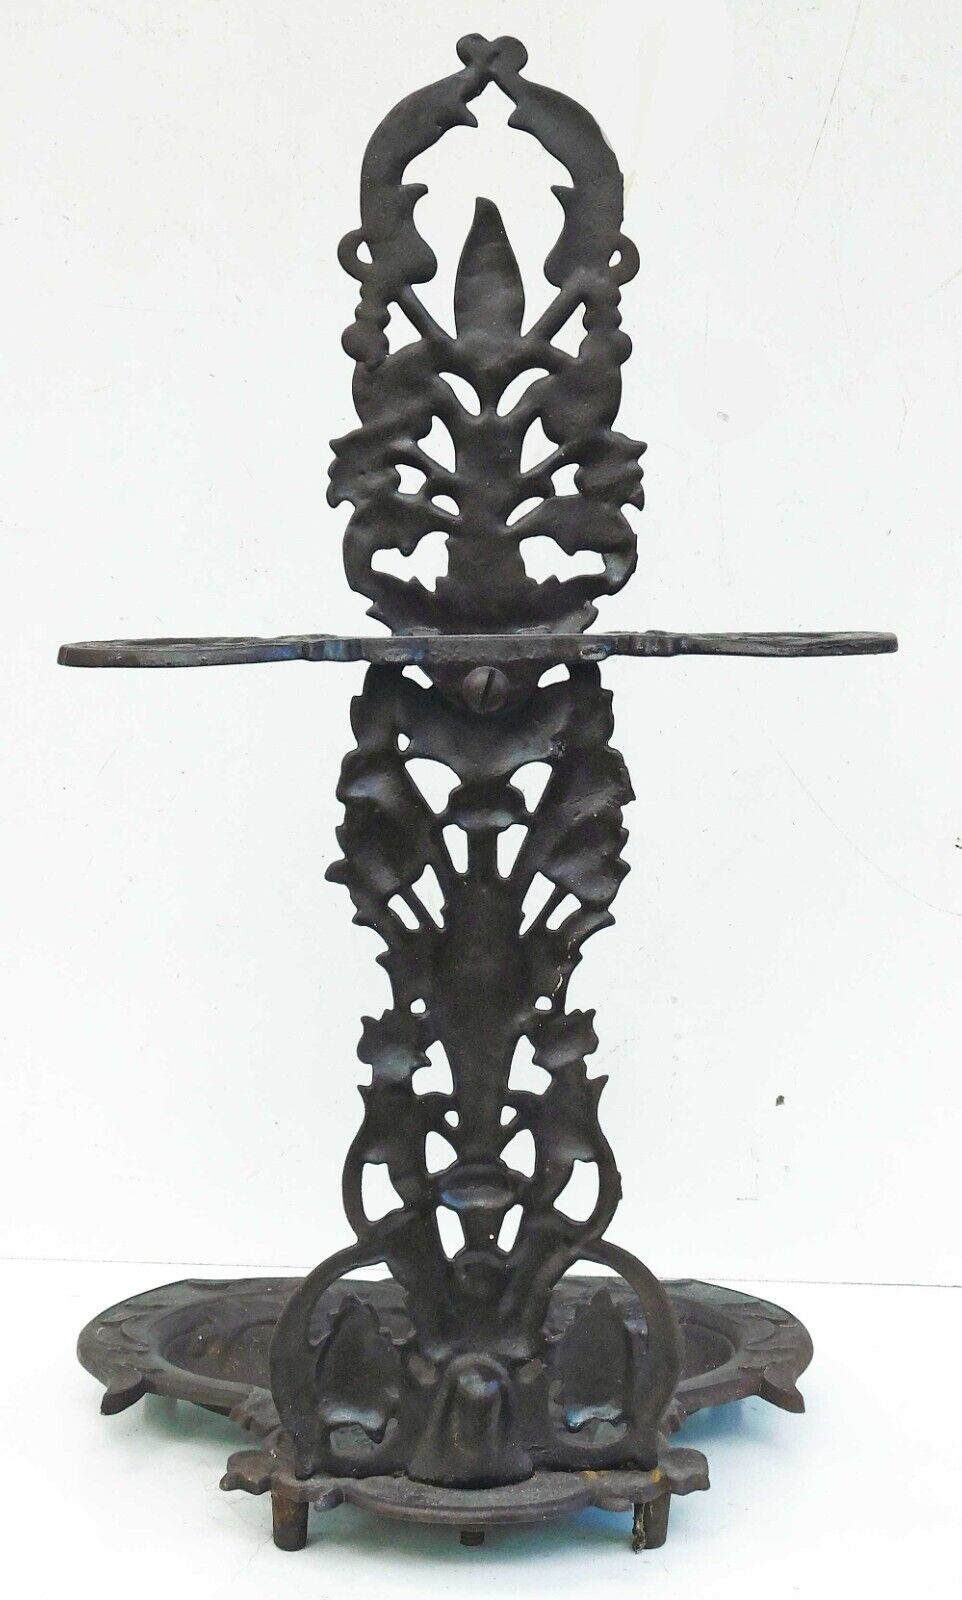 Antique Victorian Ornate Cast Iron Fireplace - Stove Tool Holder Nice Small Size